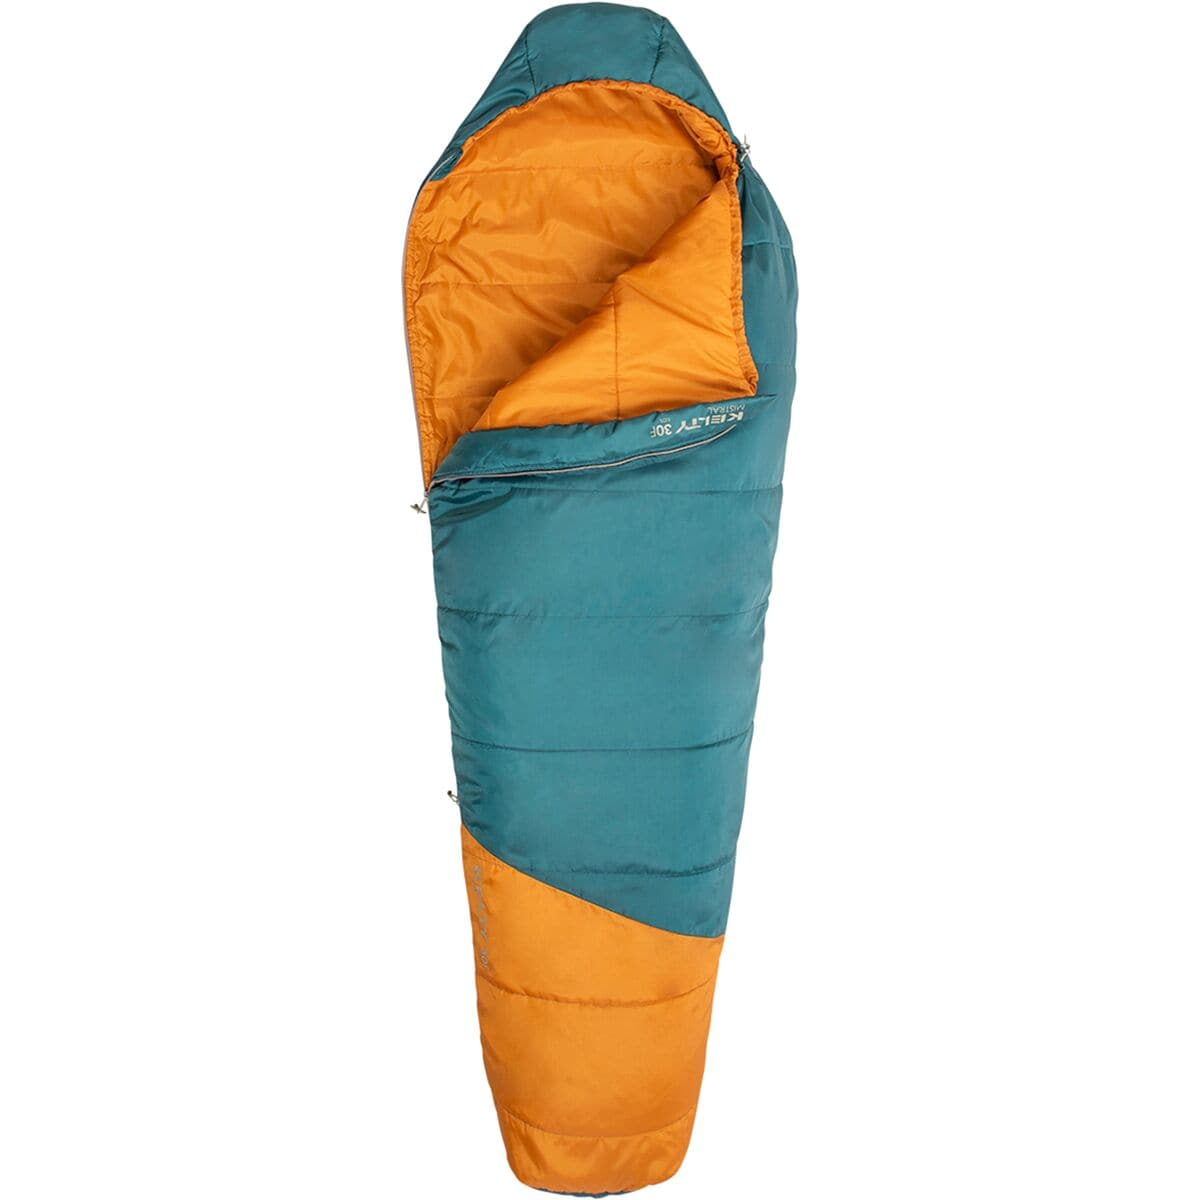 Mistral Sleeping Bag: 30F Synthetic - Kids